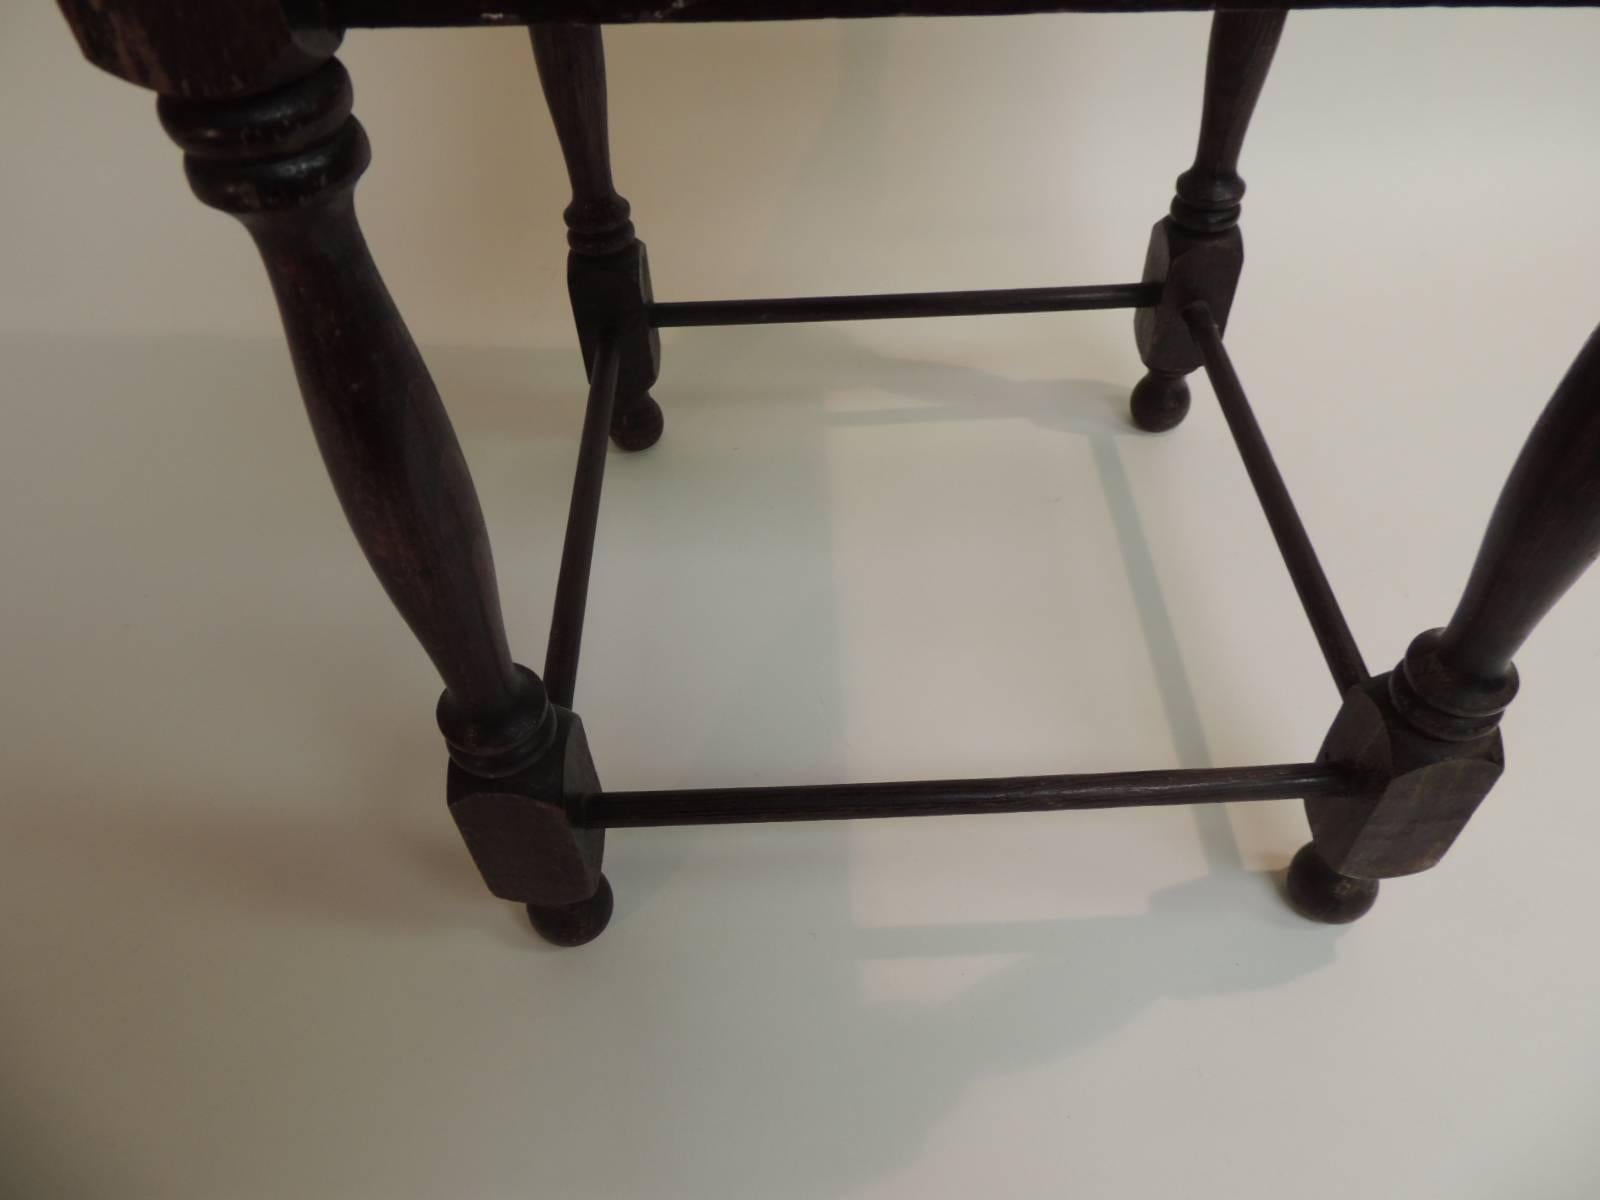 English Antique Square Milking Stool with Turned Wood Legs